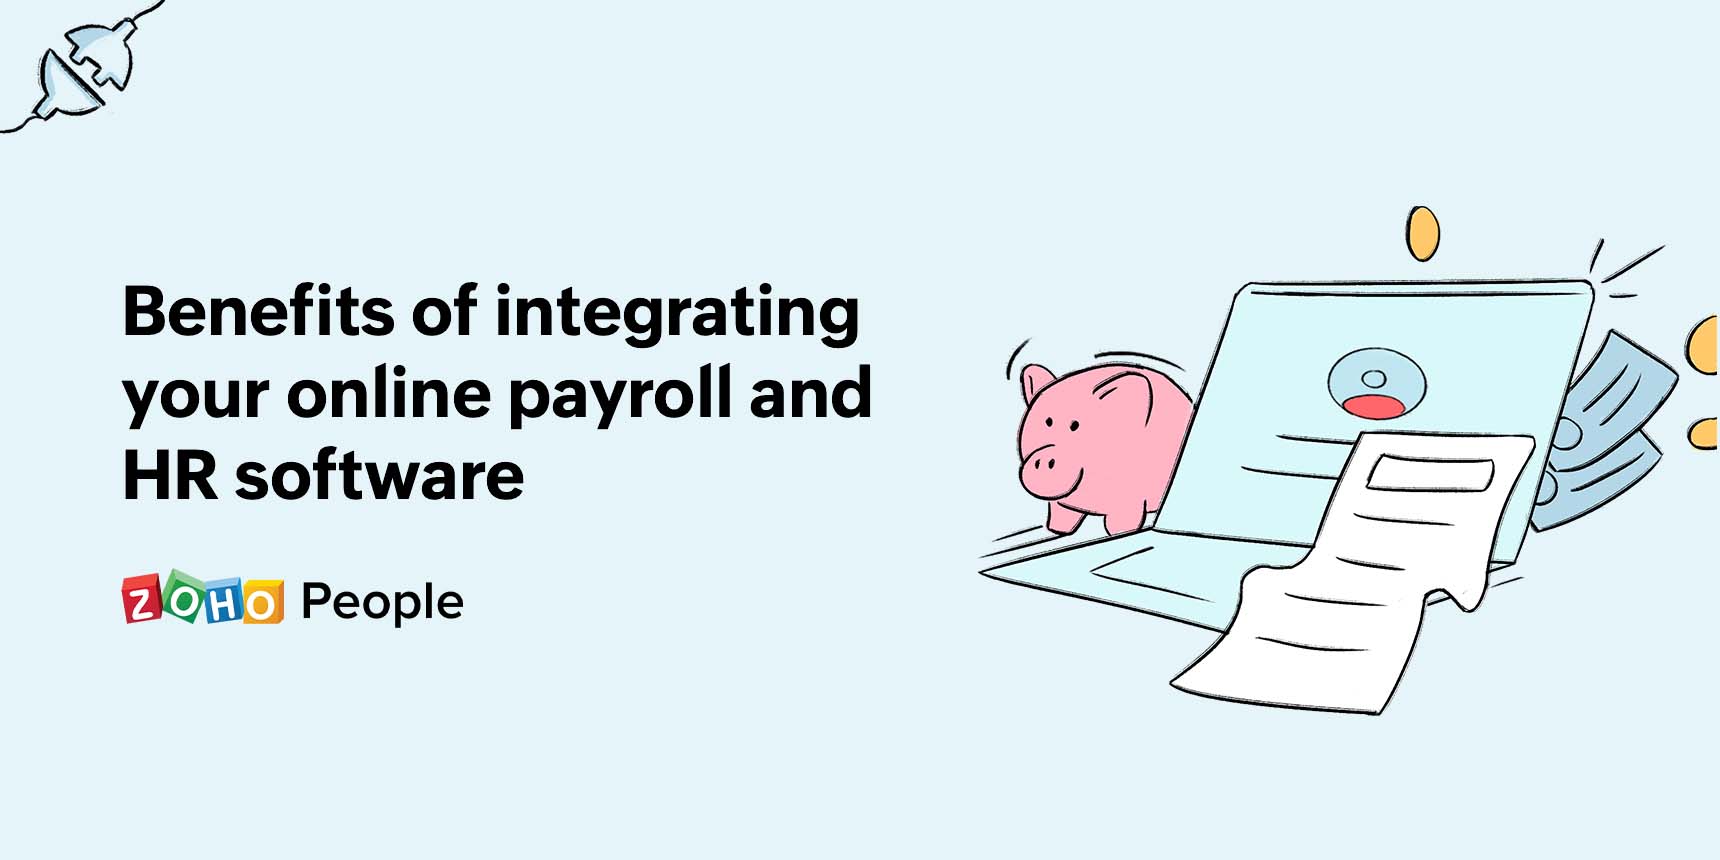 Why is it crucial to integrate your online payroll and HR system?